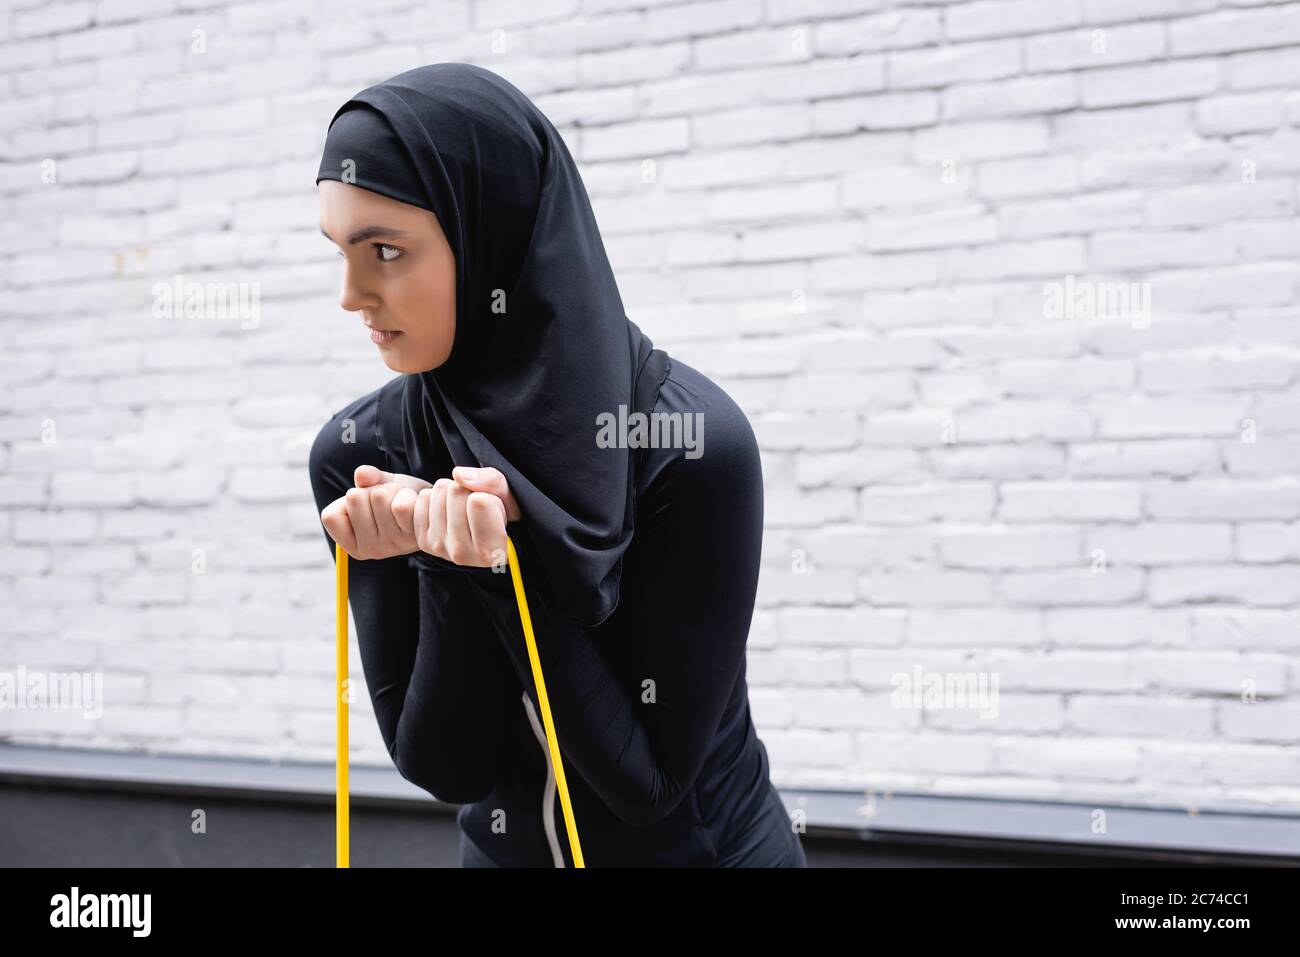 arabian girl in hijab exercising with resistance band near brick wall Stock Photo